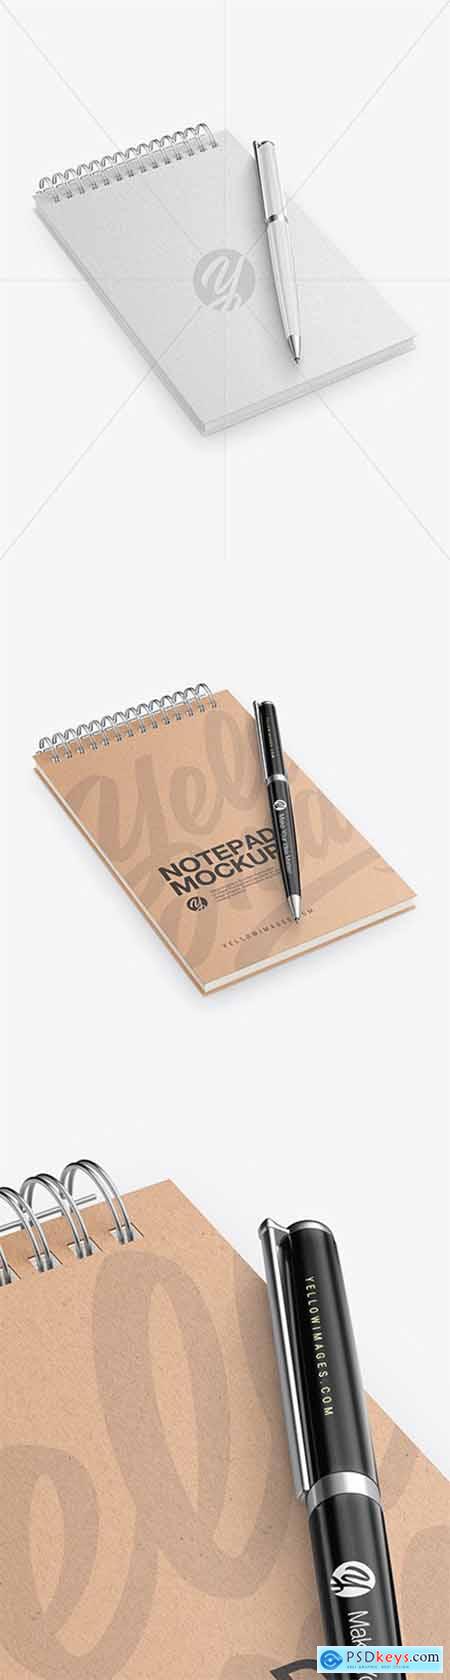 Download Notepad With Pen Mockup 60547 Free Download Photoshop Vector Stock Image Via Torrent Zippyshare From Psdkeys Com PSD Mockup Templates